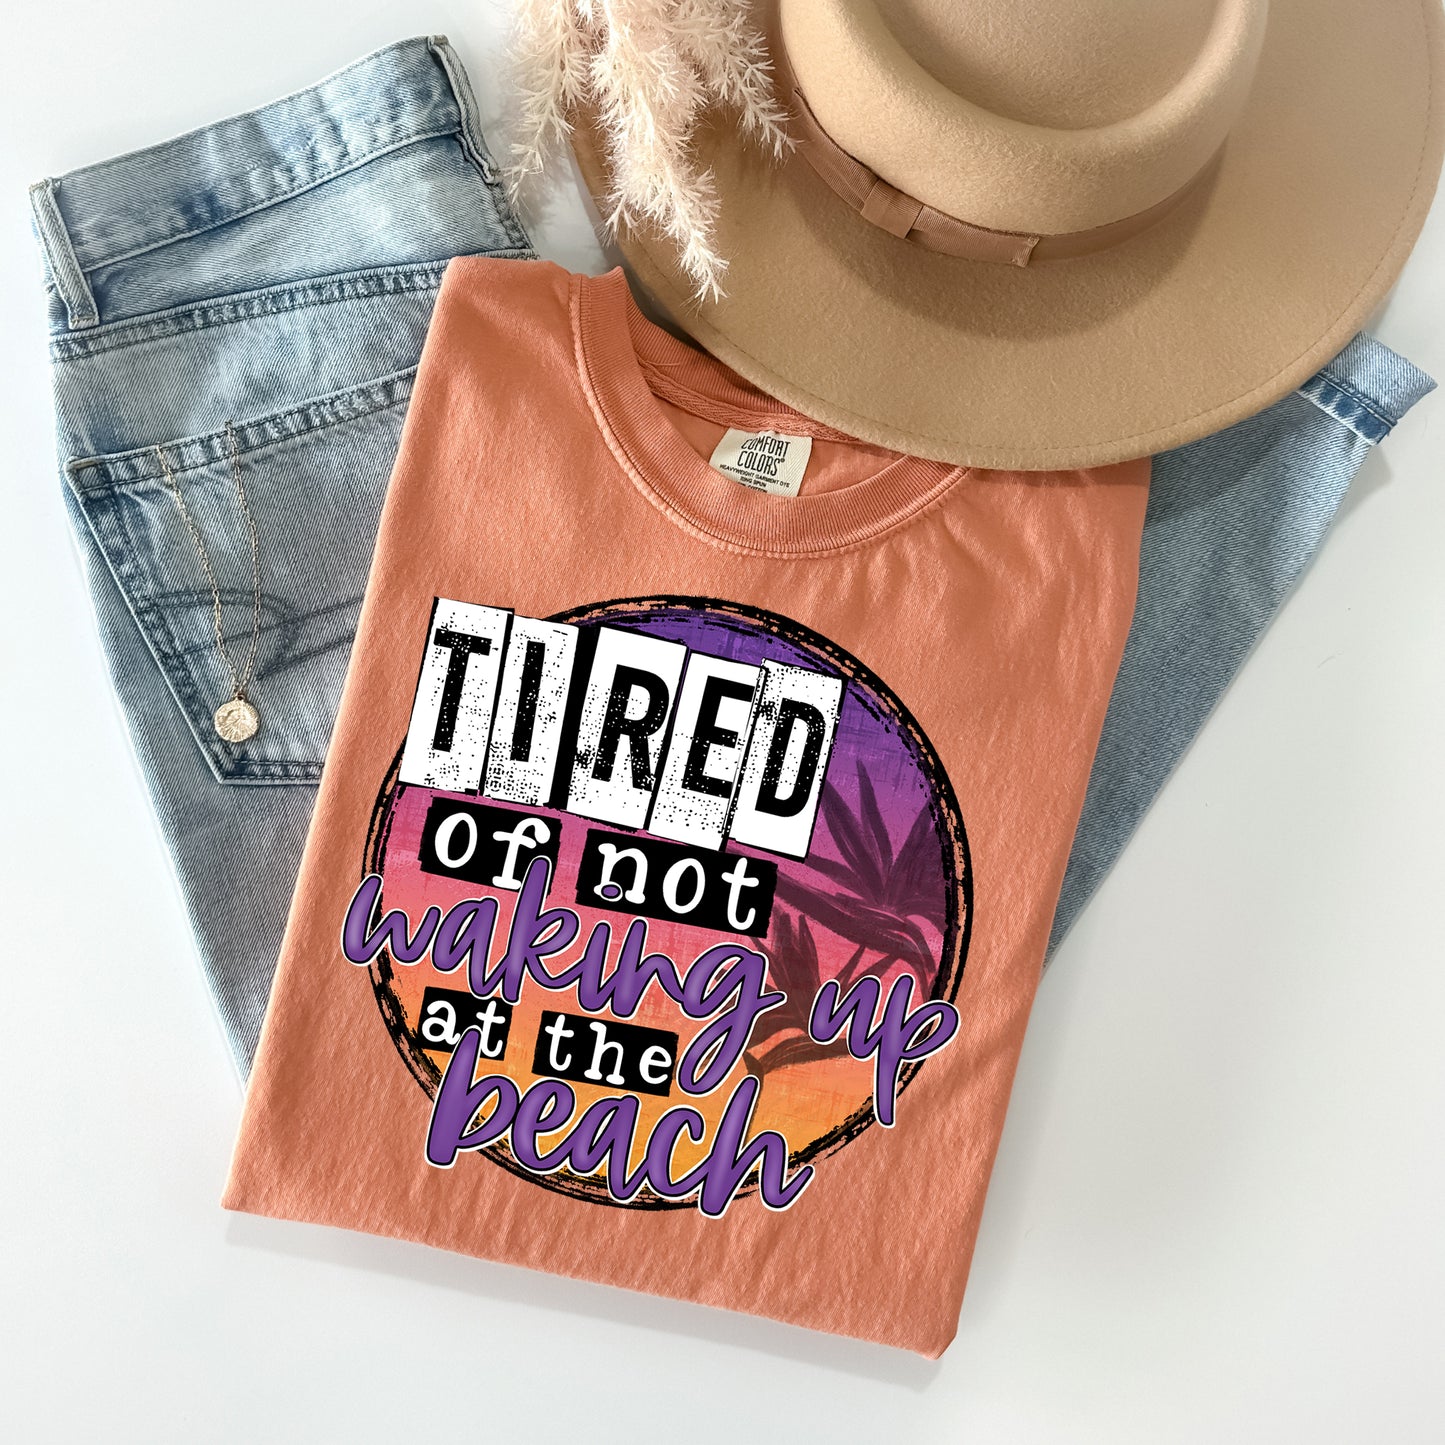 Tired of Not Waking Up at the Beach Graphic Tee